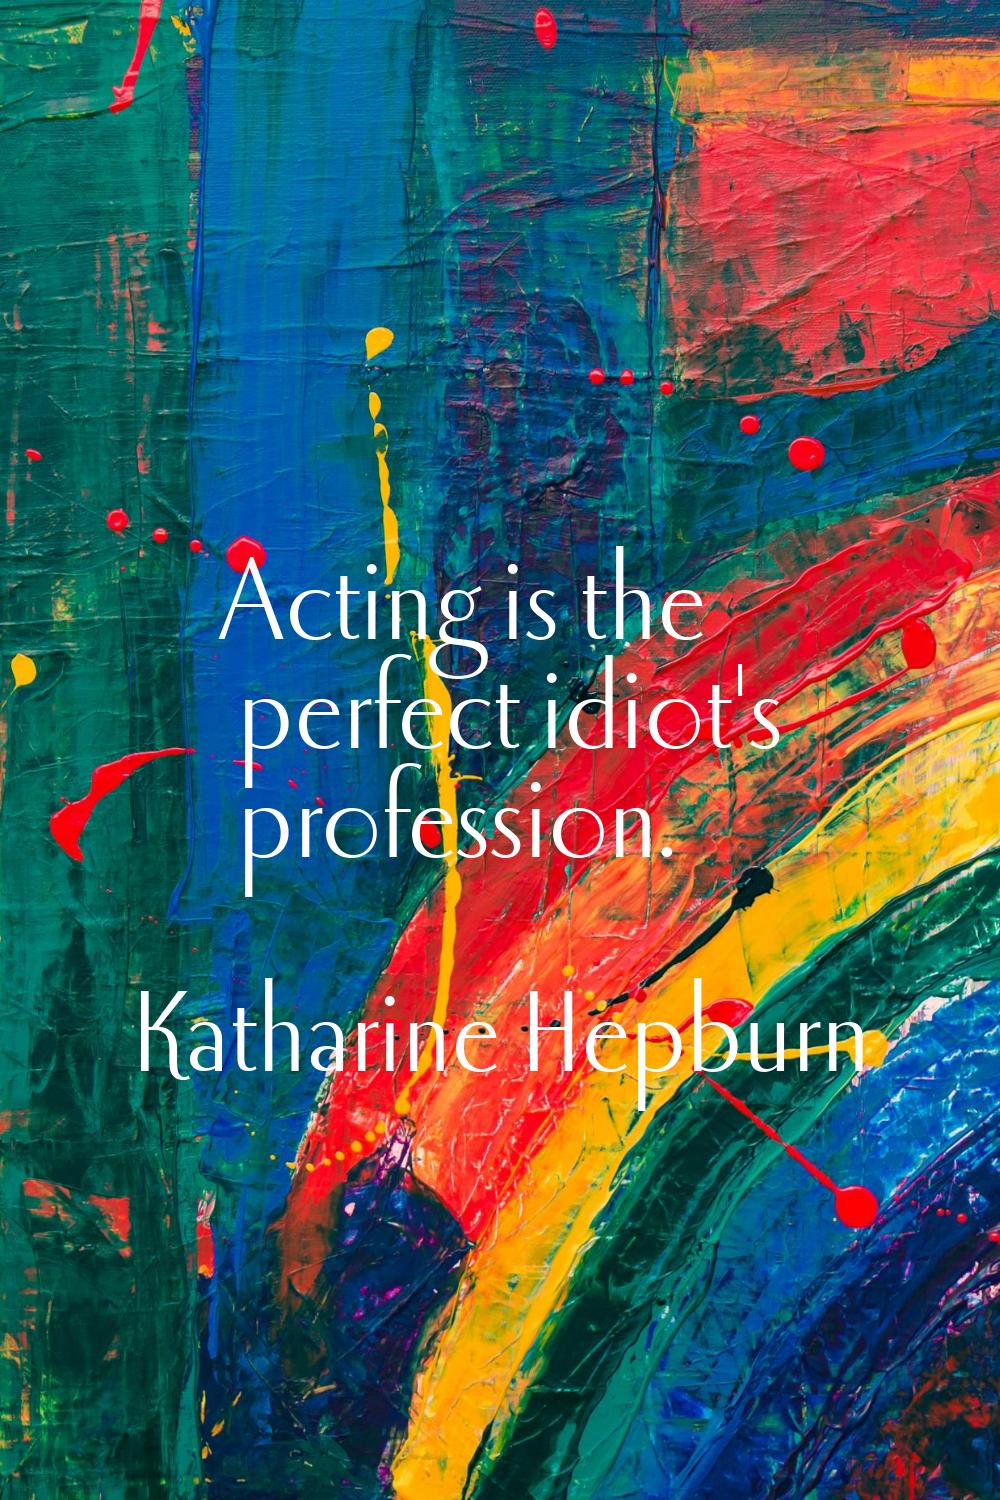 Acting is the perfect idiot's profession.